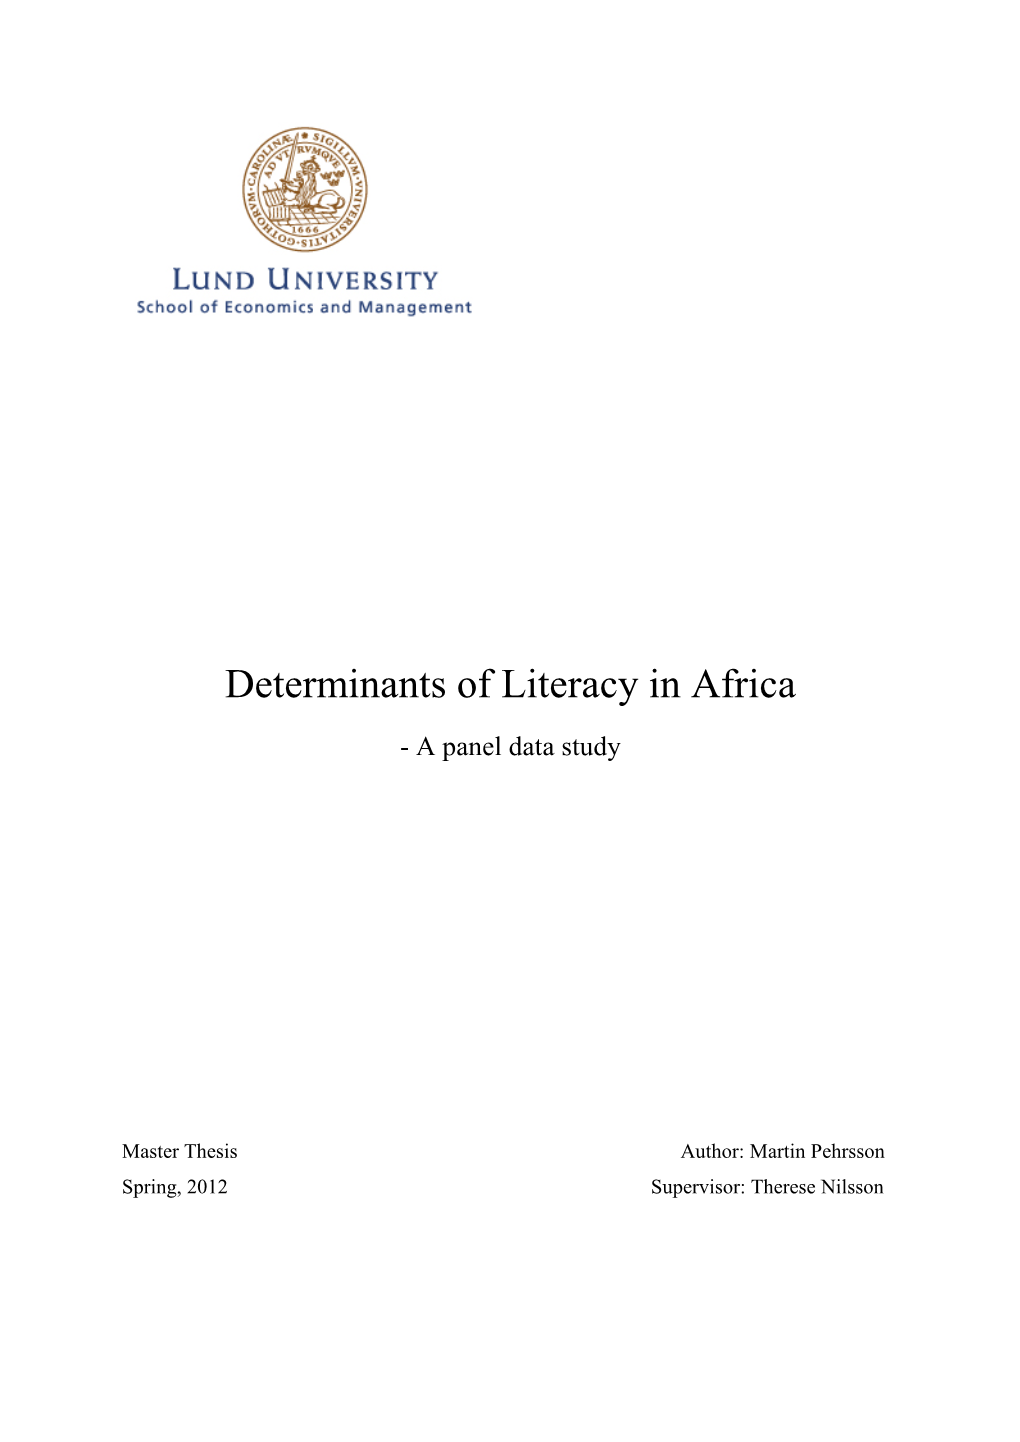 Determinants of Literacy in Africa - a Panel Data Study